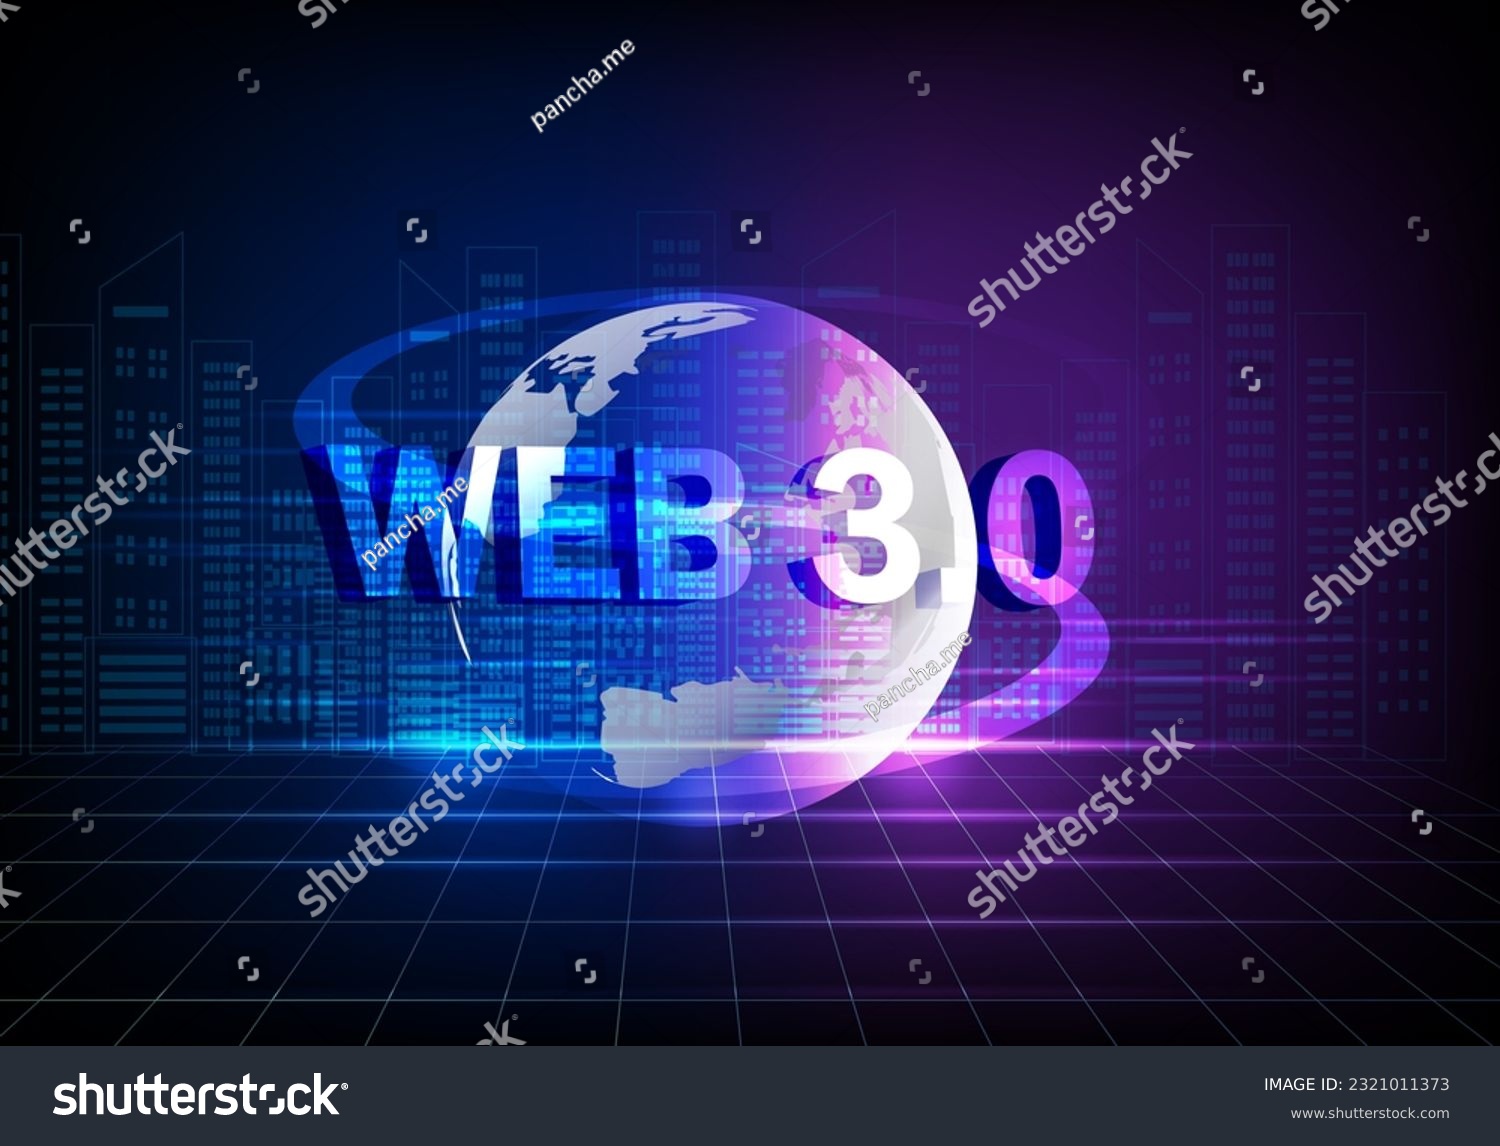 Web 3.0 concept, web 3.0 typography on blue background, new version website using blockchain technology, cryptocurrency, and NFT art. Vector illustration
 #2321011373